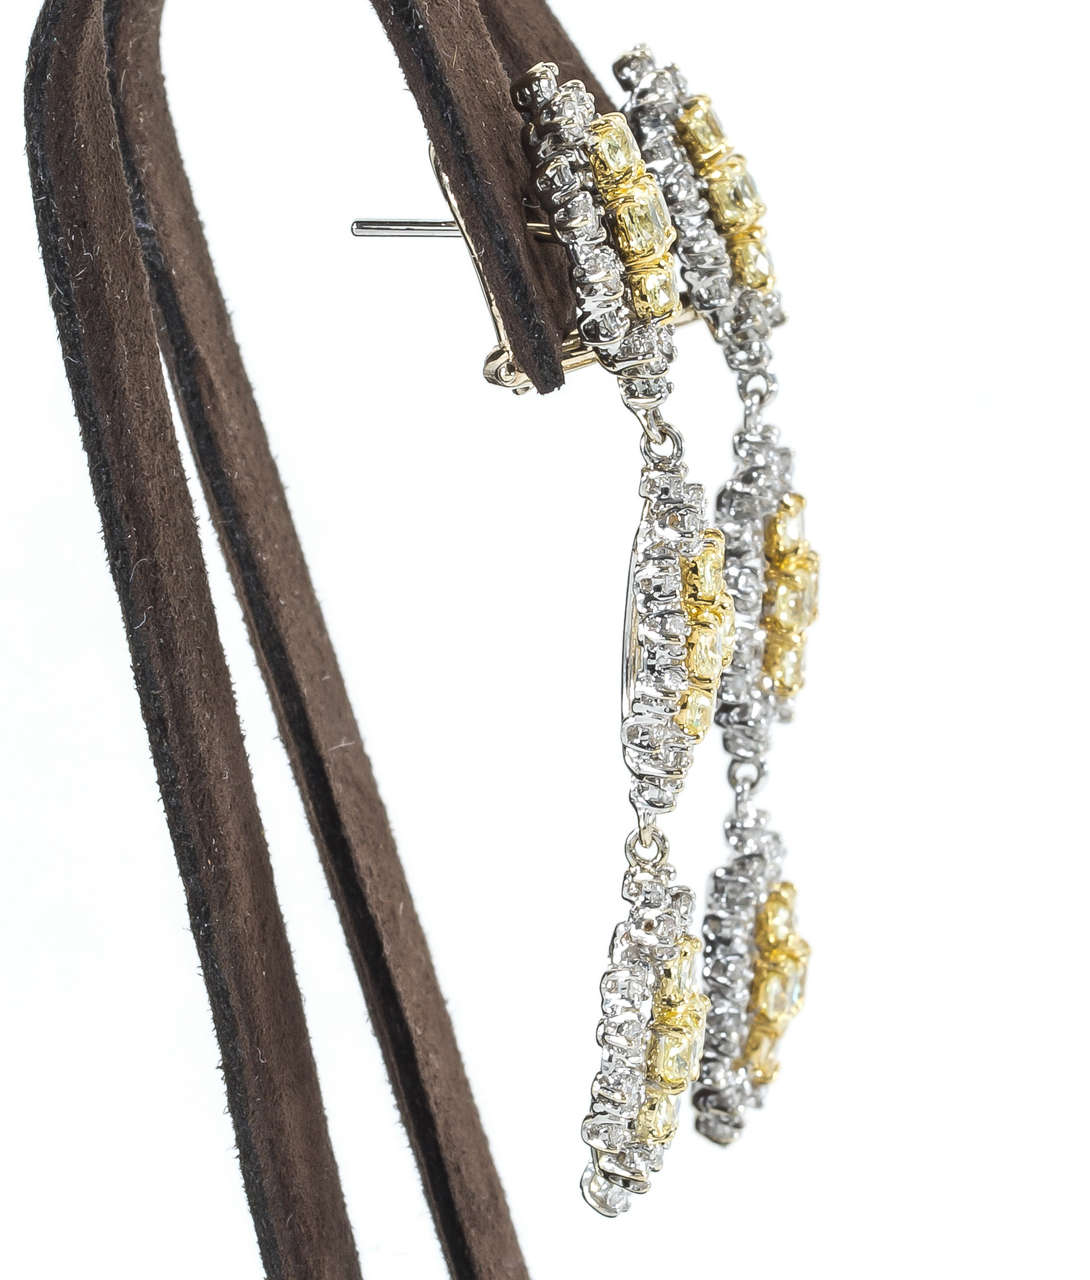 Multishape Yellow and White Diamond Necklace and Earrings Set 4